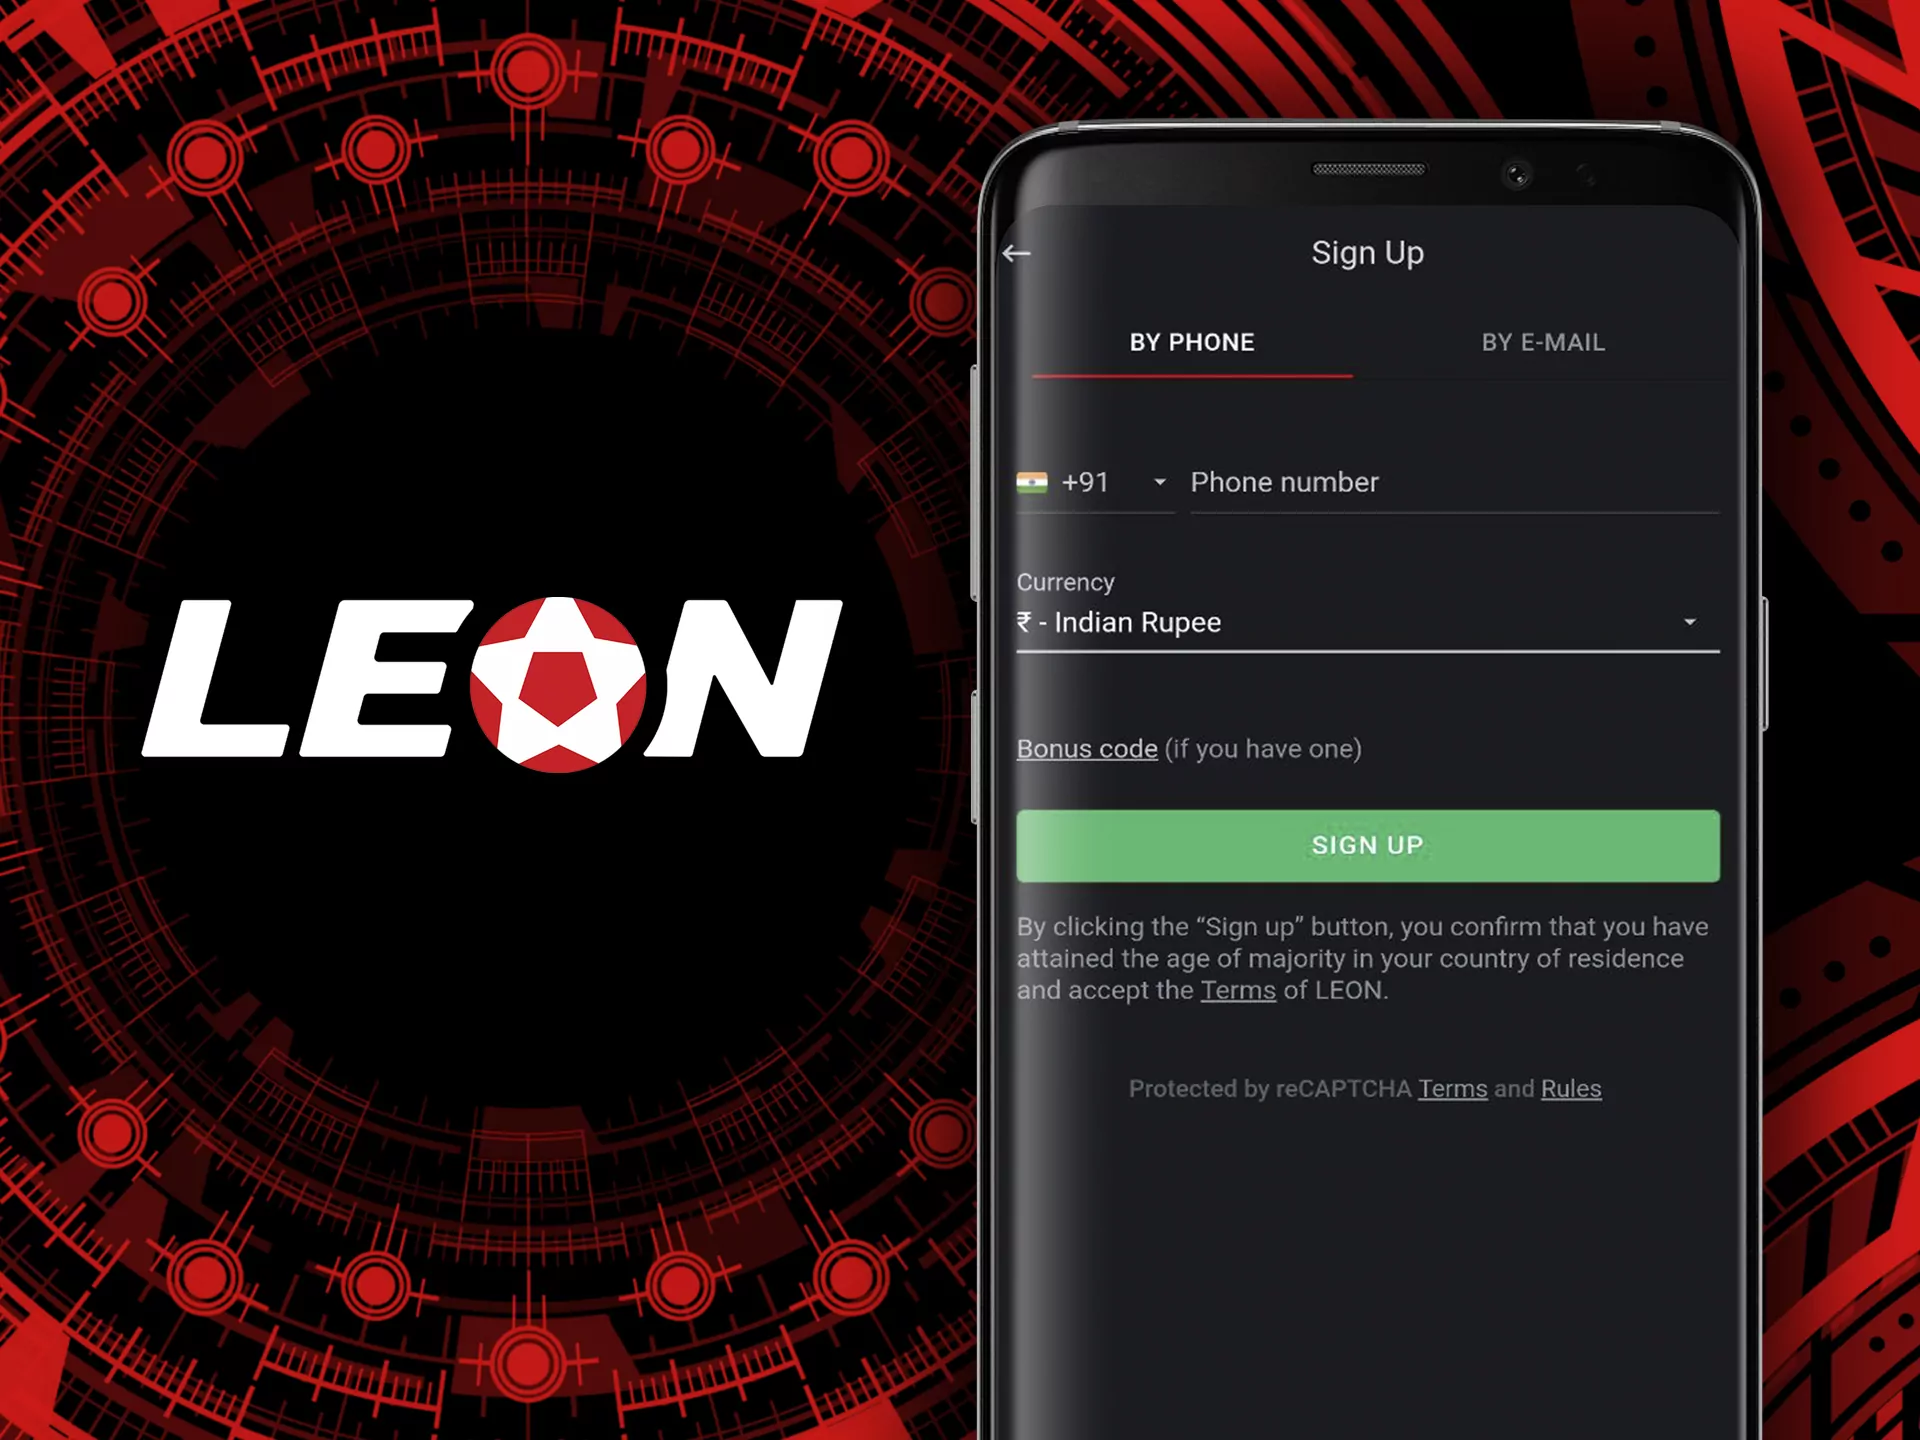 You can also install the Leon app and register via it.